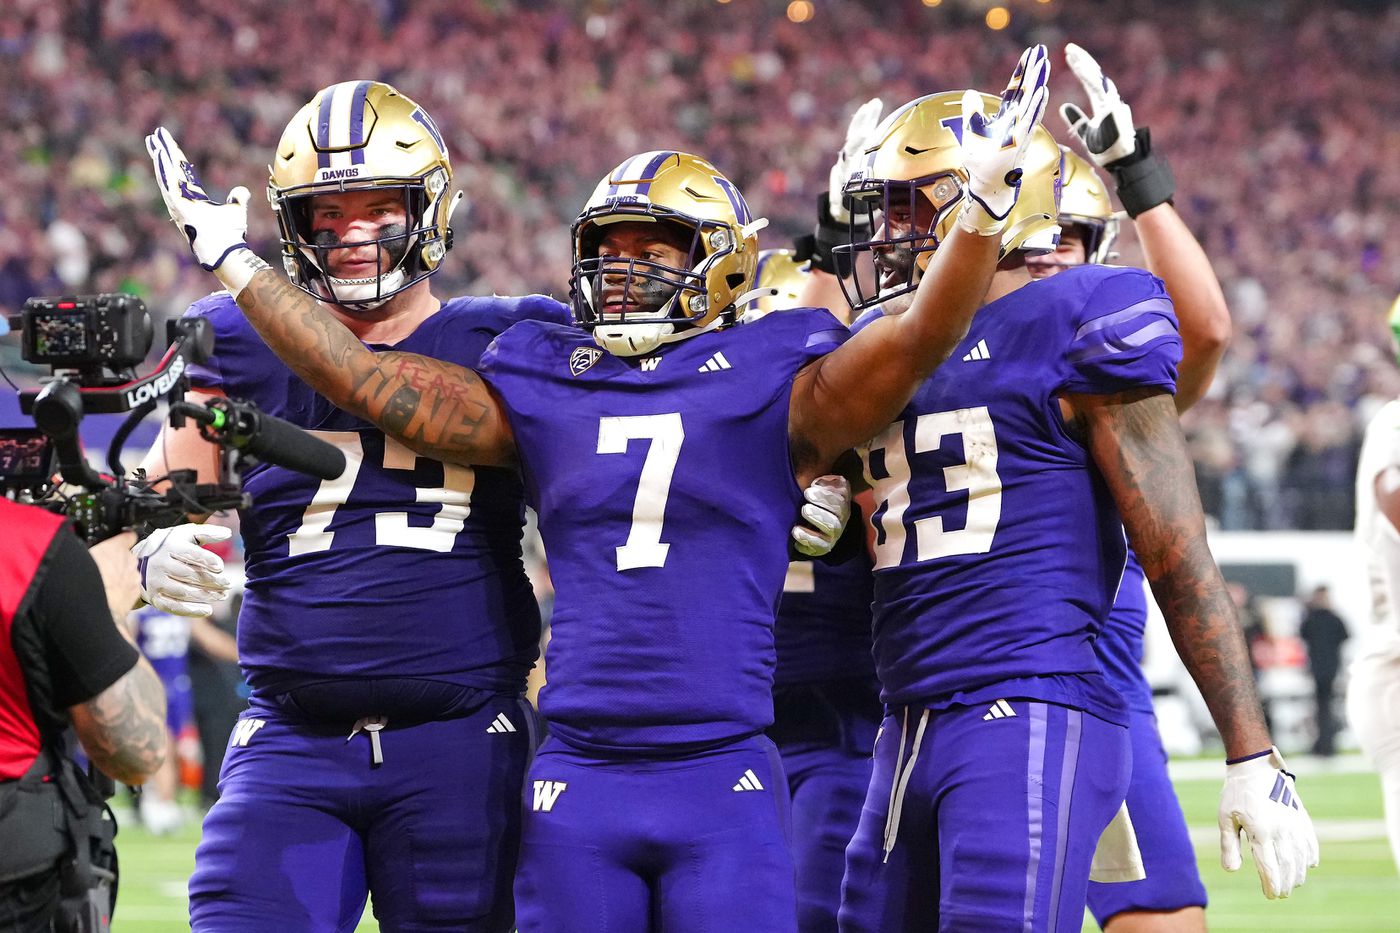 why washington can win college football playoff to become national champions